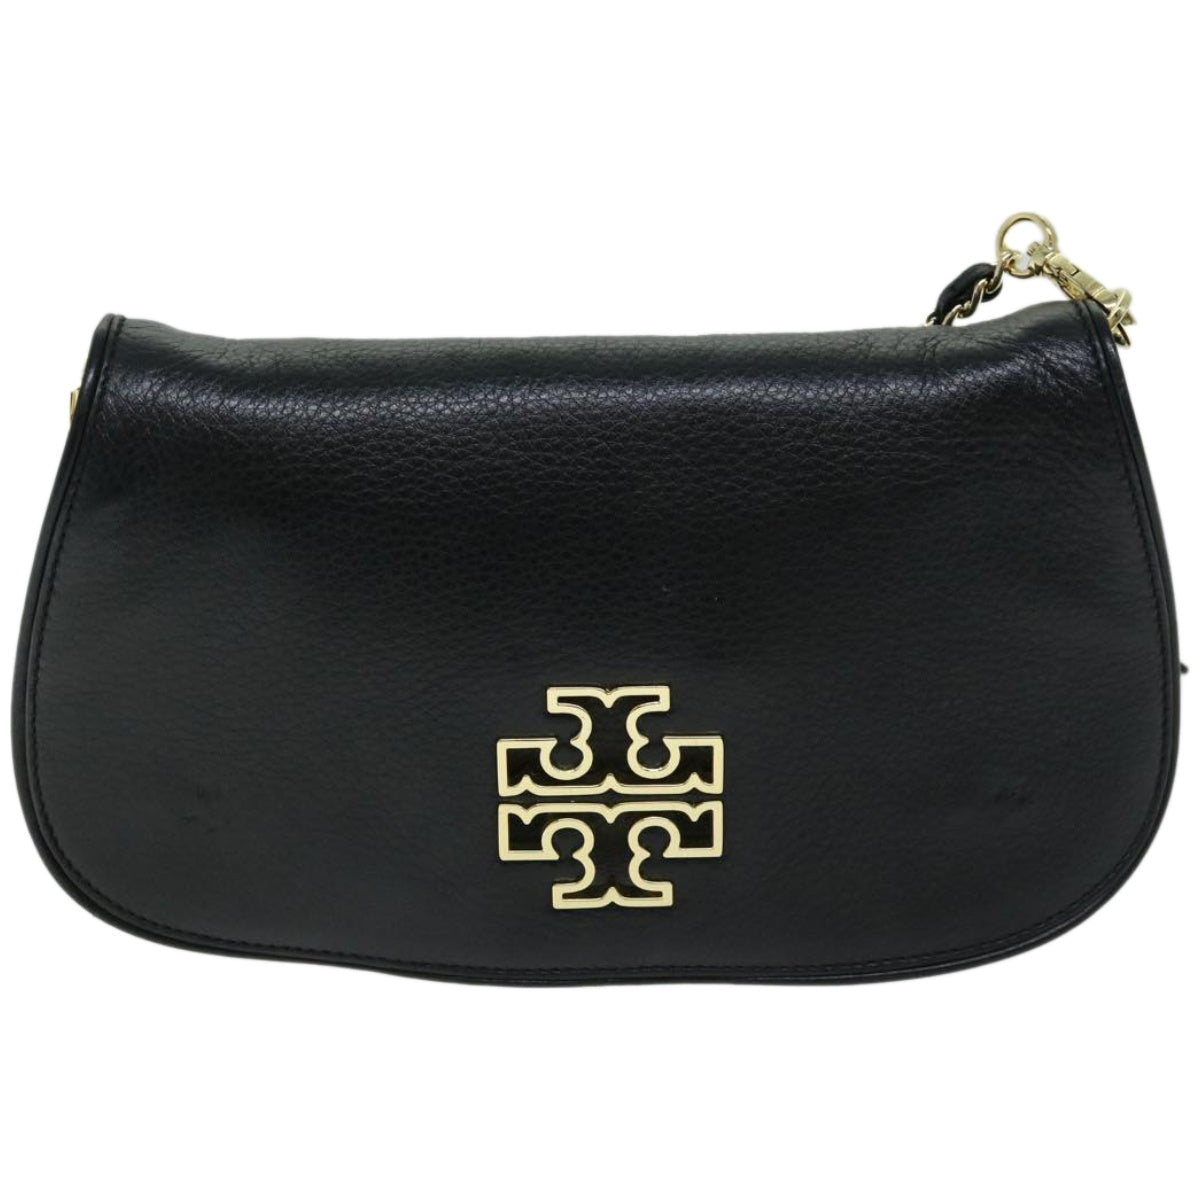 TORY BURCH Chain Shoulder Bag Leather Black Auth am5805 - 0